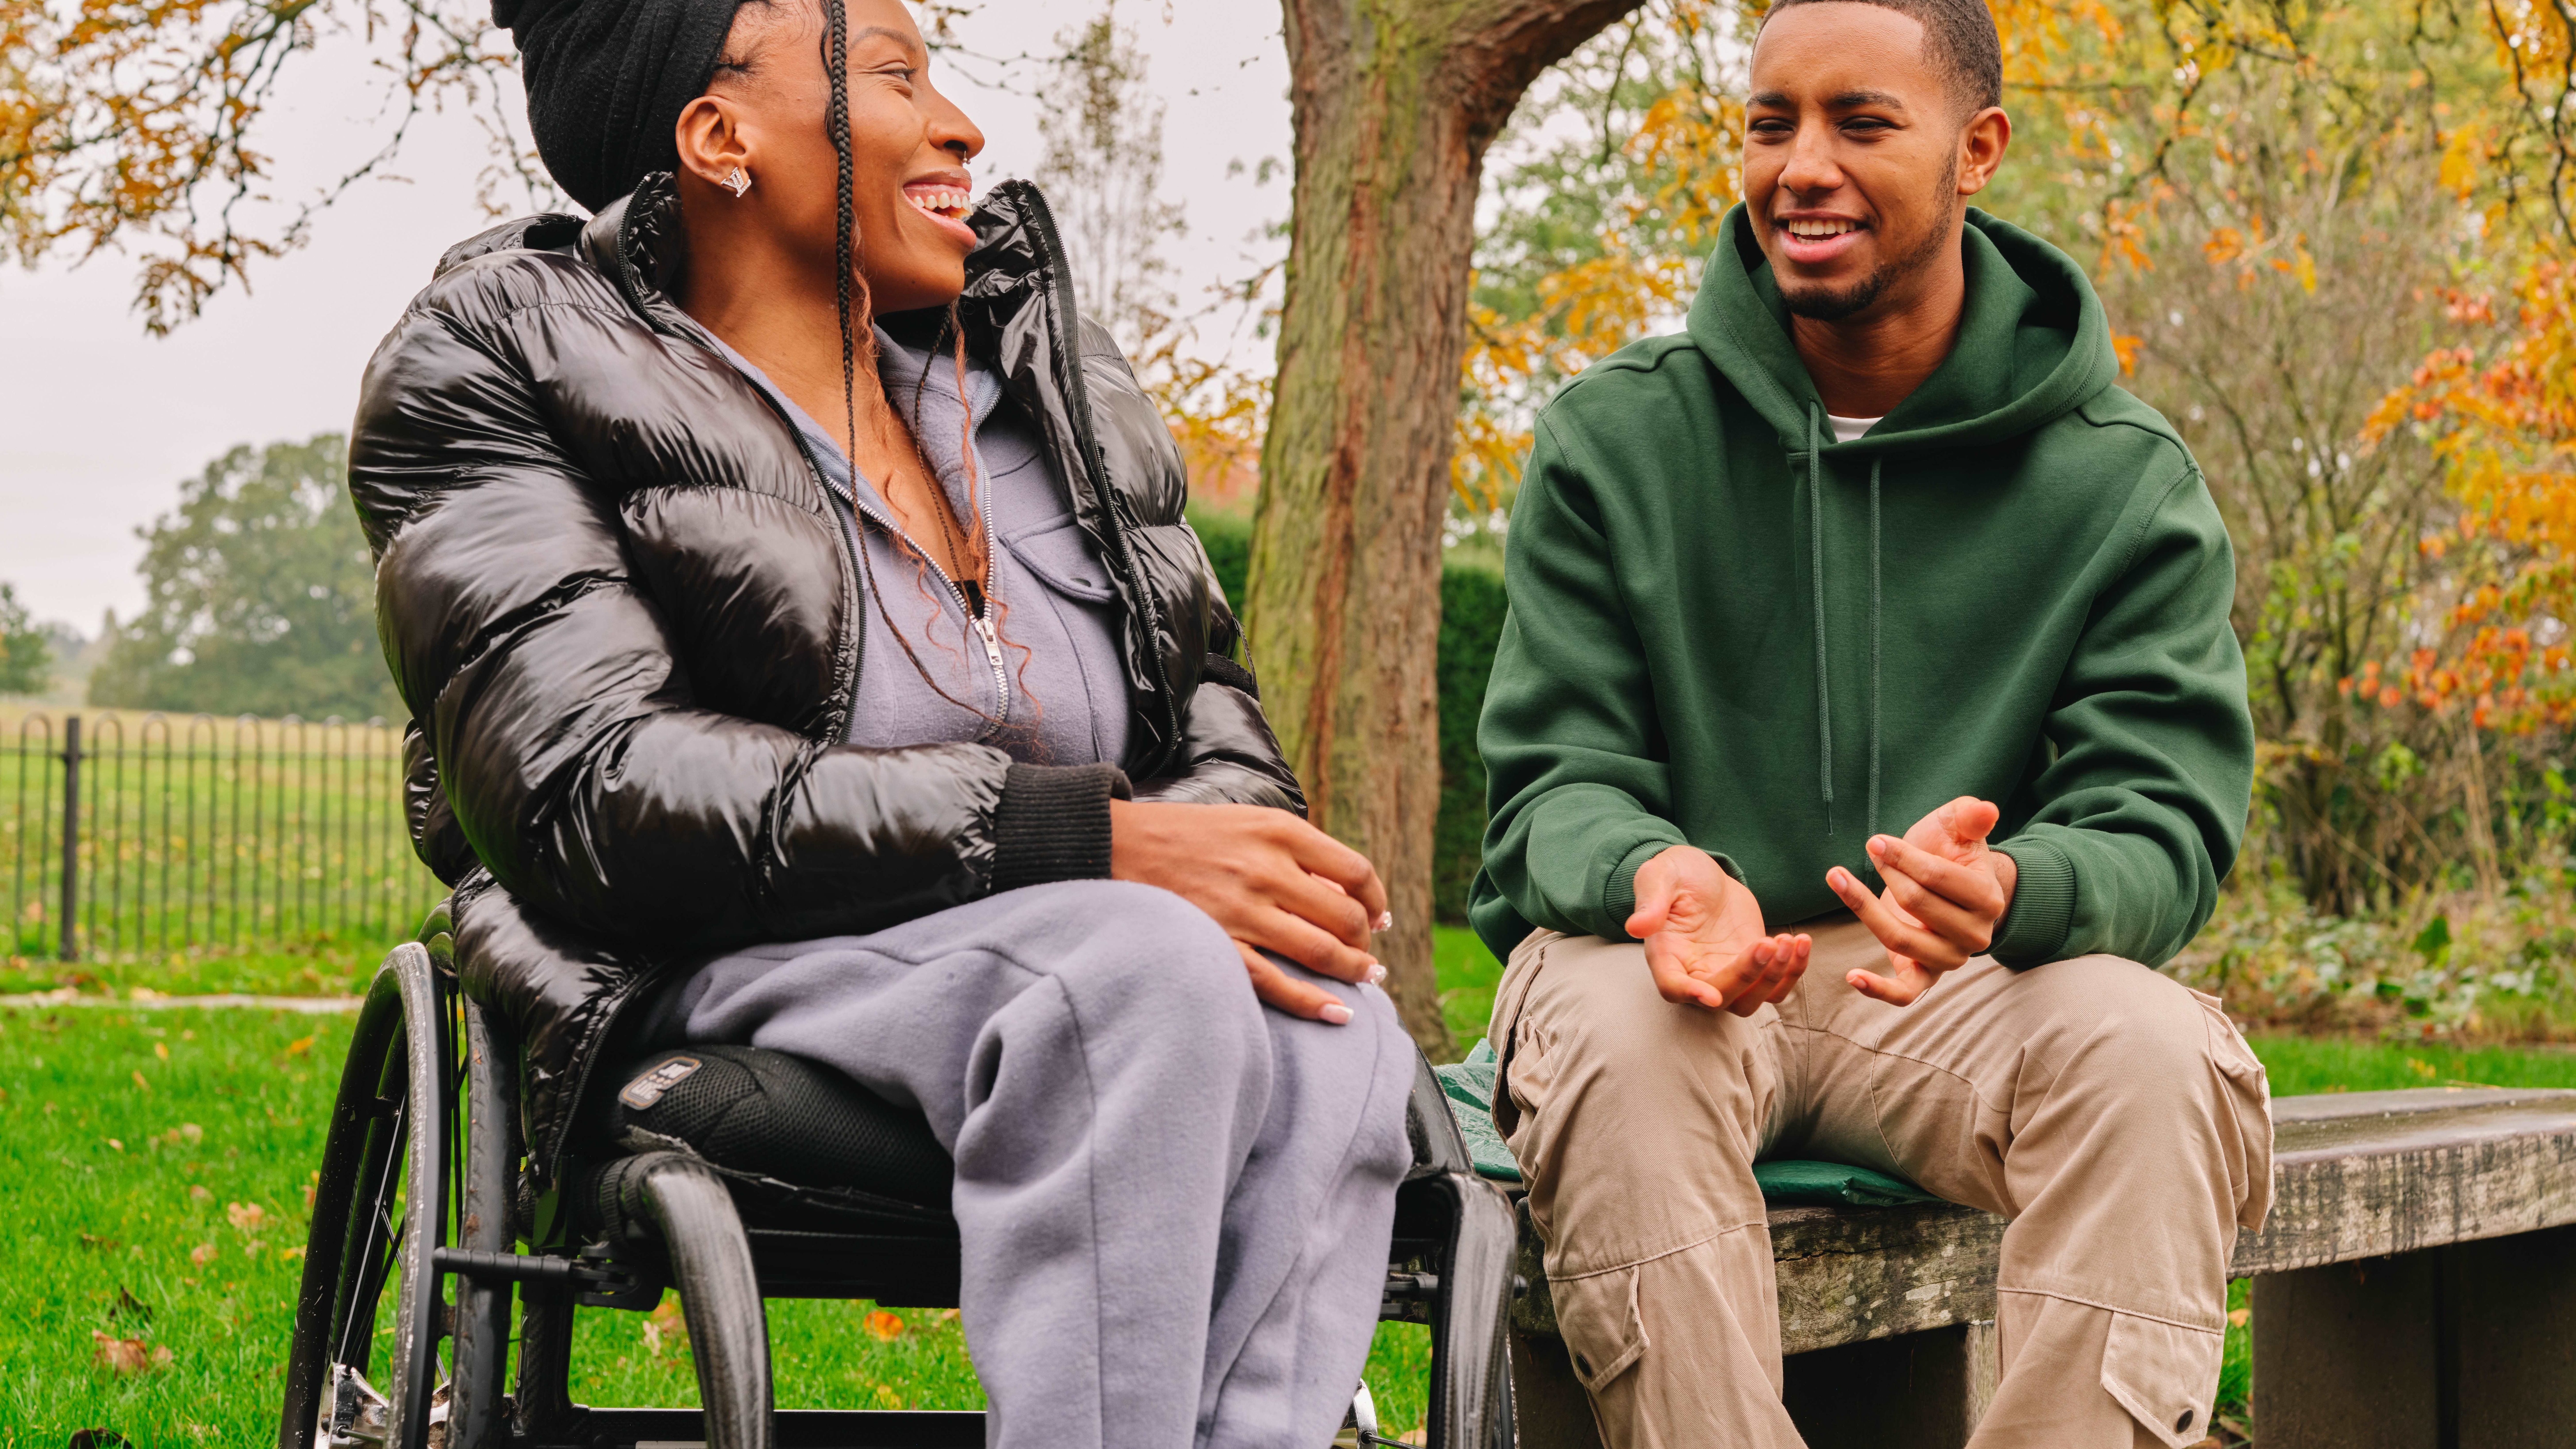 A young Black woman in a wheelchair and a young Black man on a bench. They are talking and laughing together.